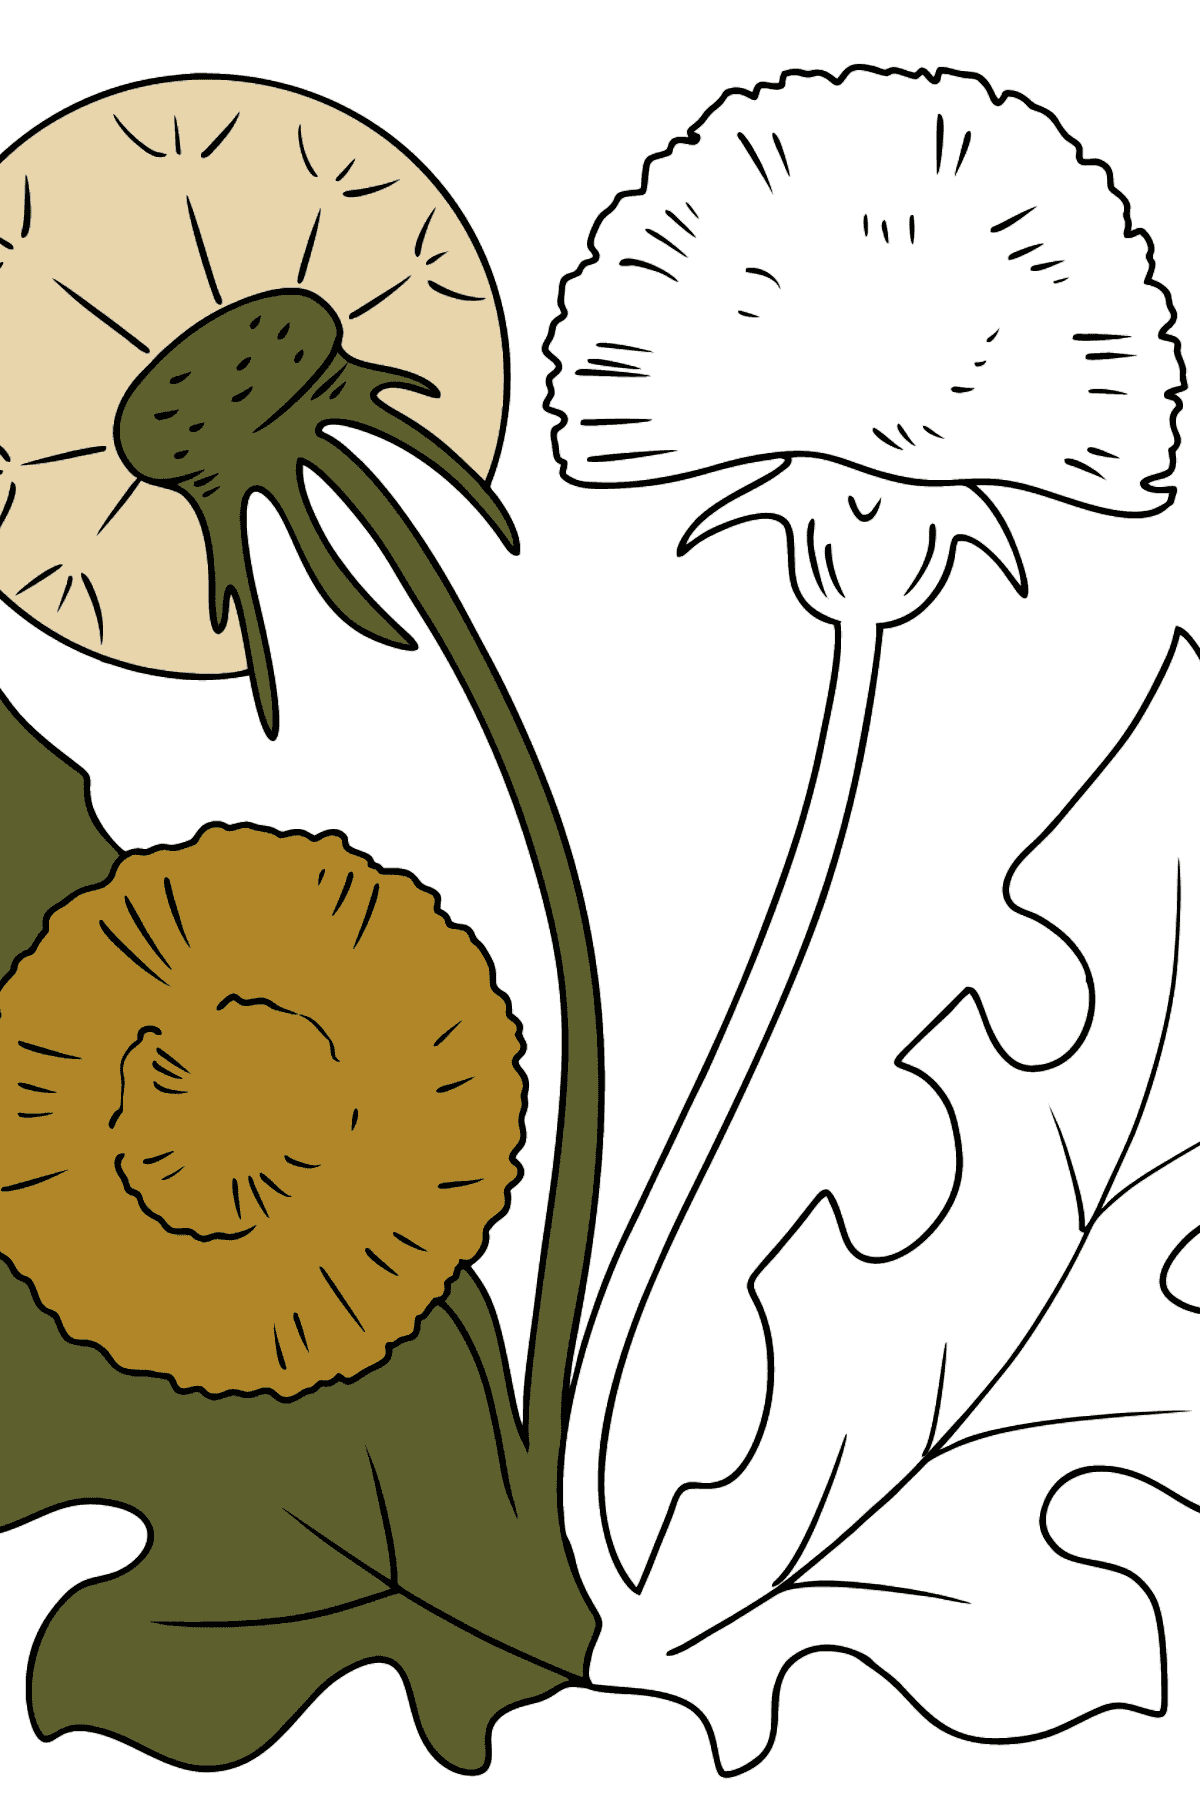 Dandelion Coloring Page - Coloring Pages for Kids